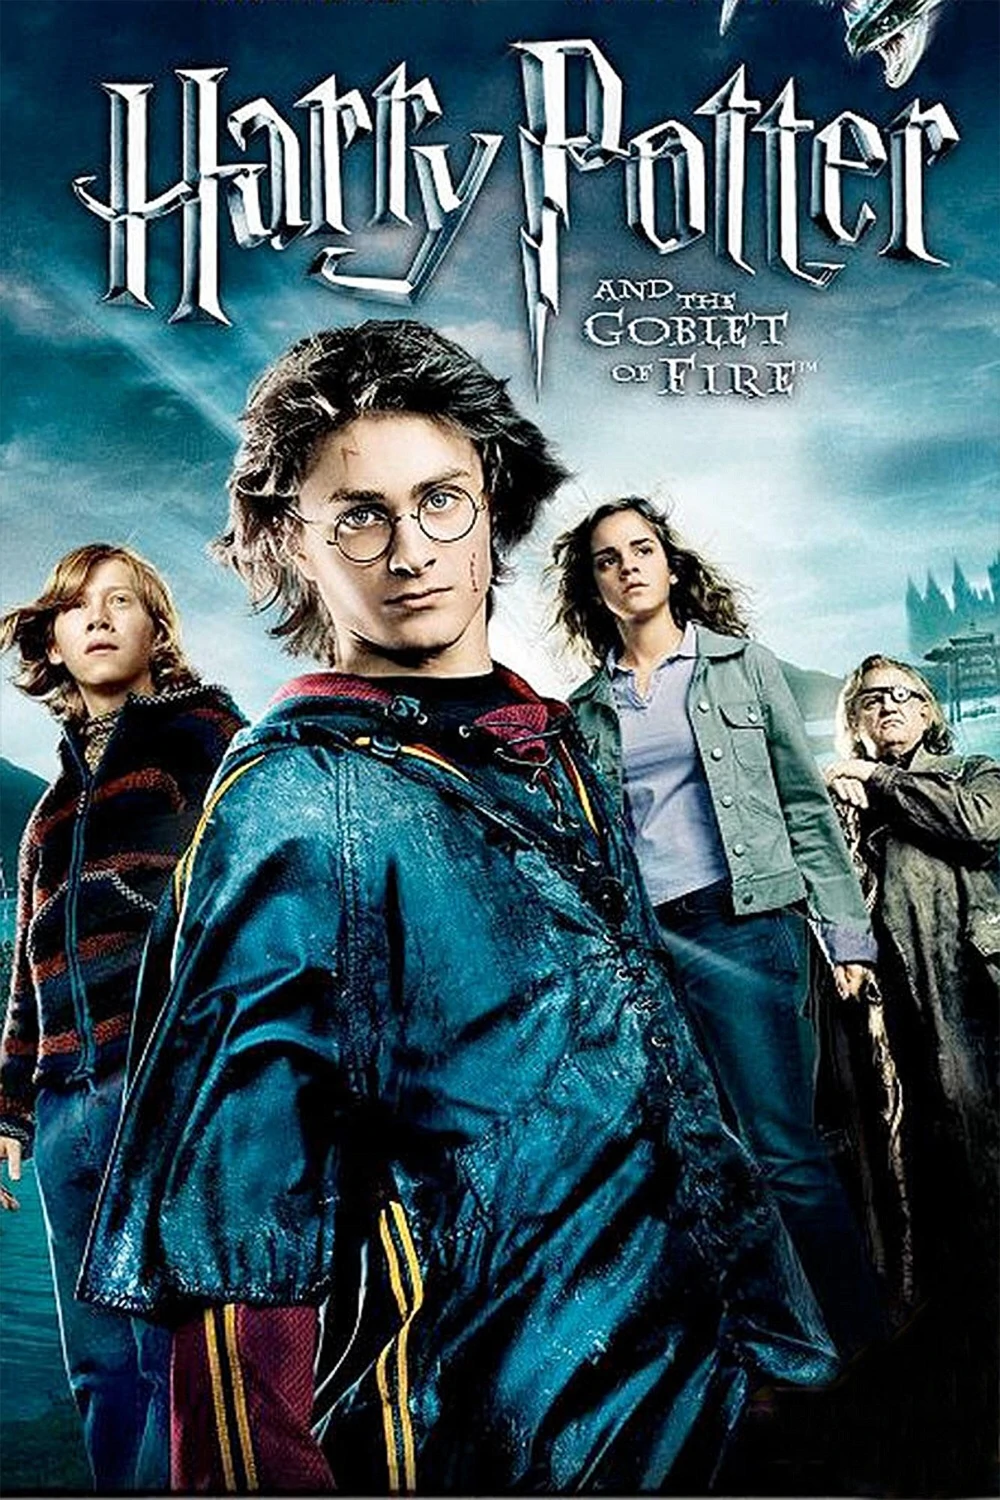 Harry Potter movie poster - Deathly Hallows, (Fred and George) 11 x 17